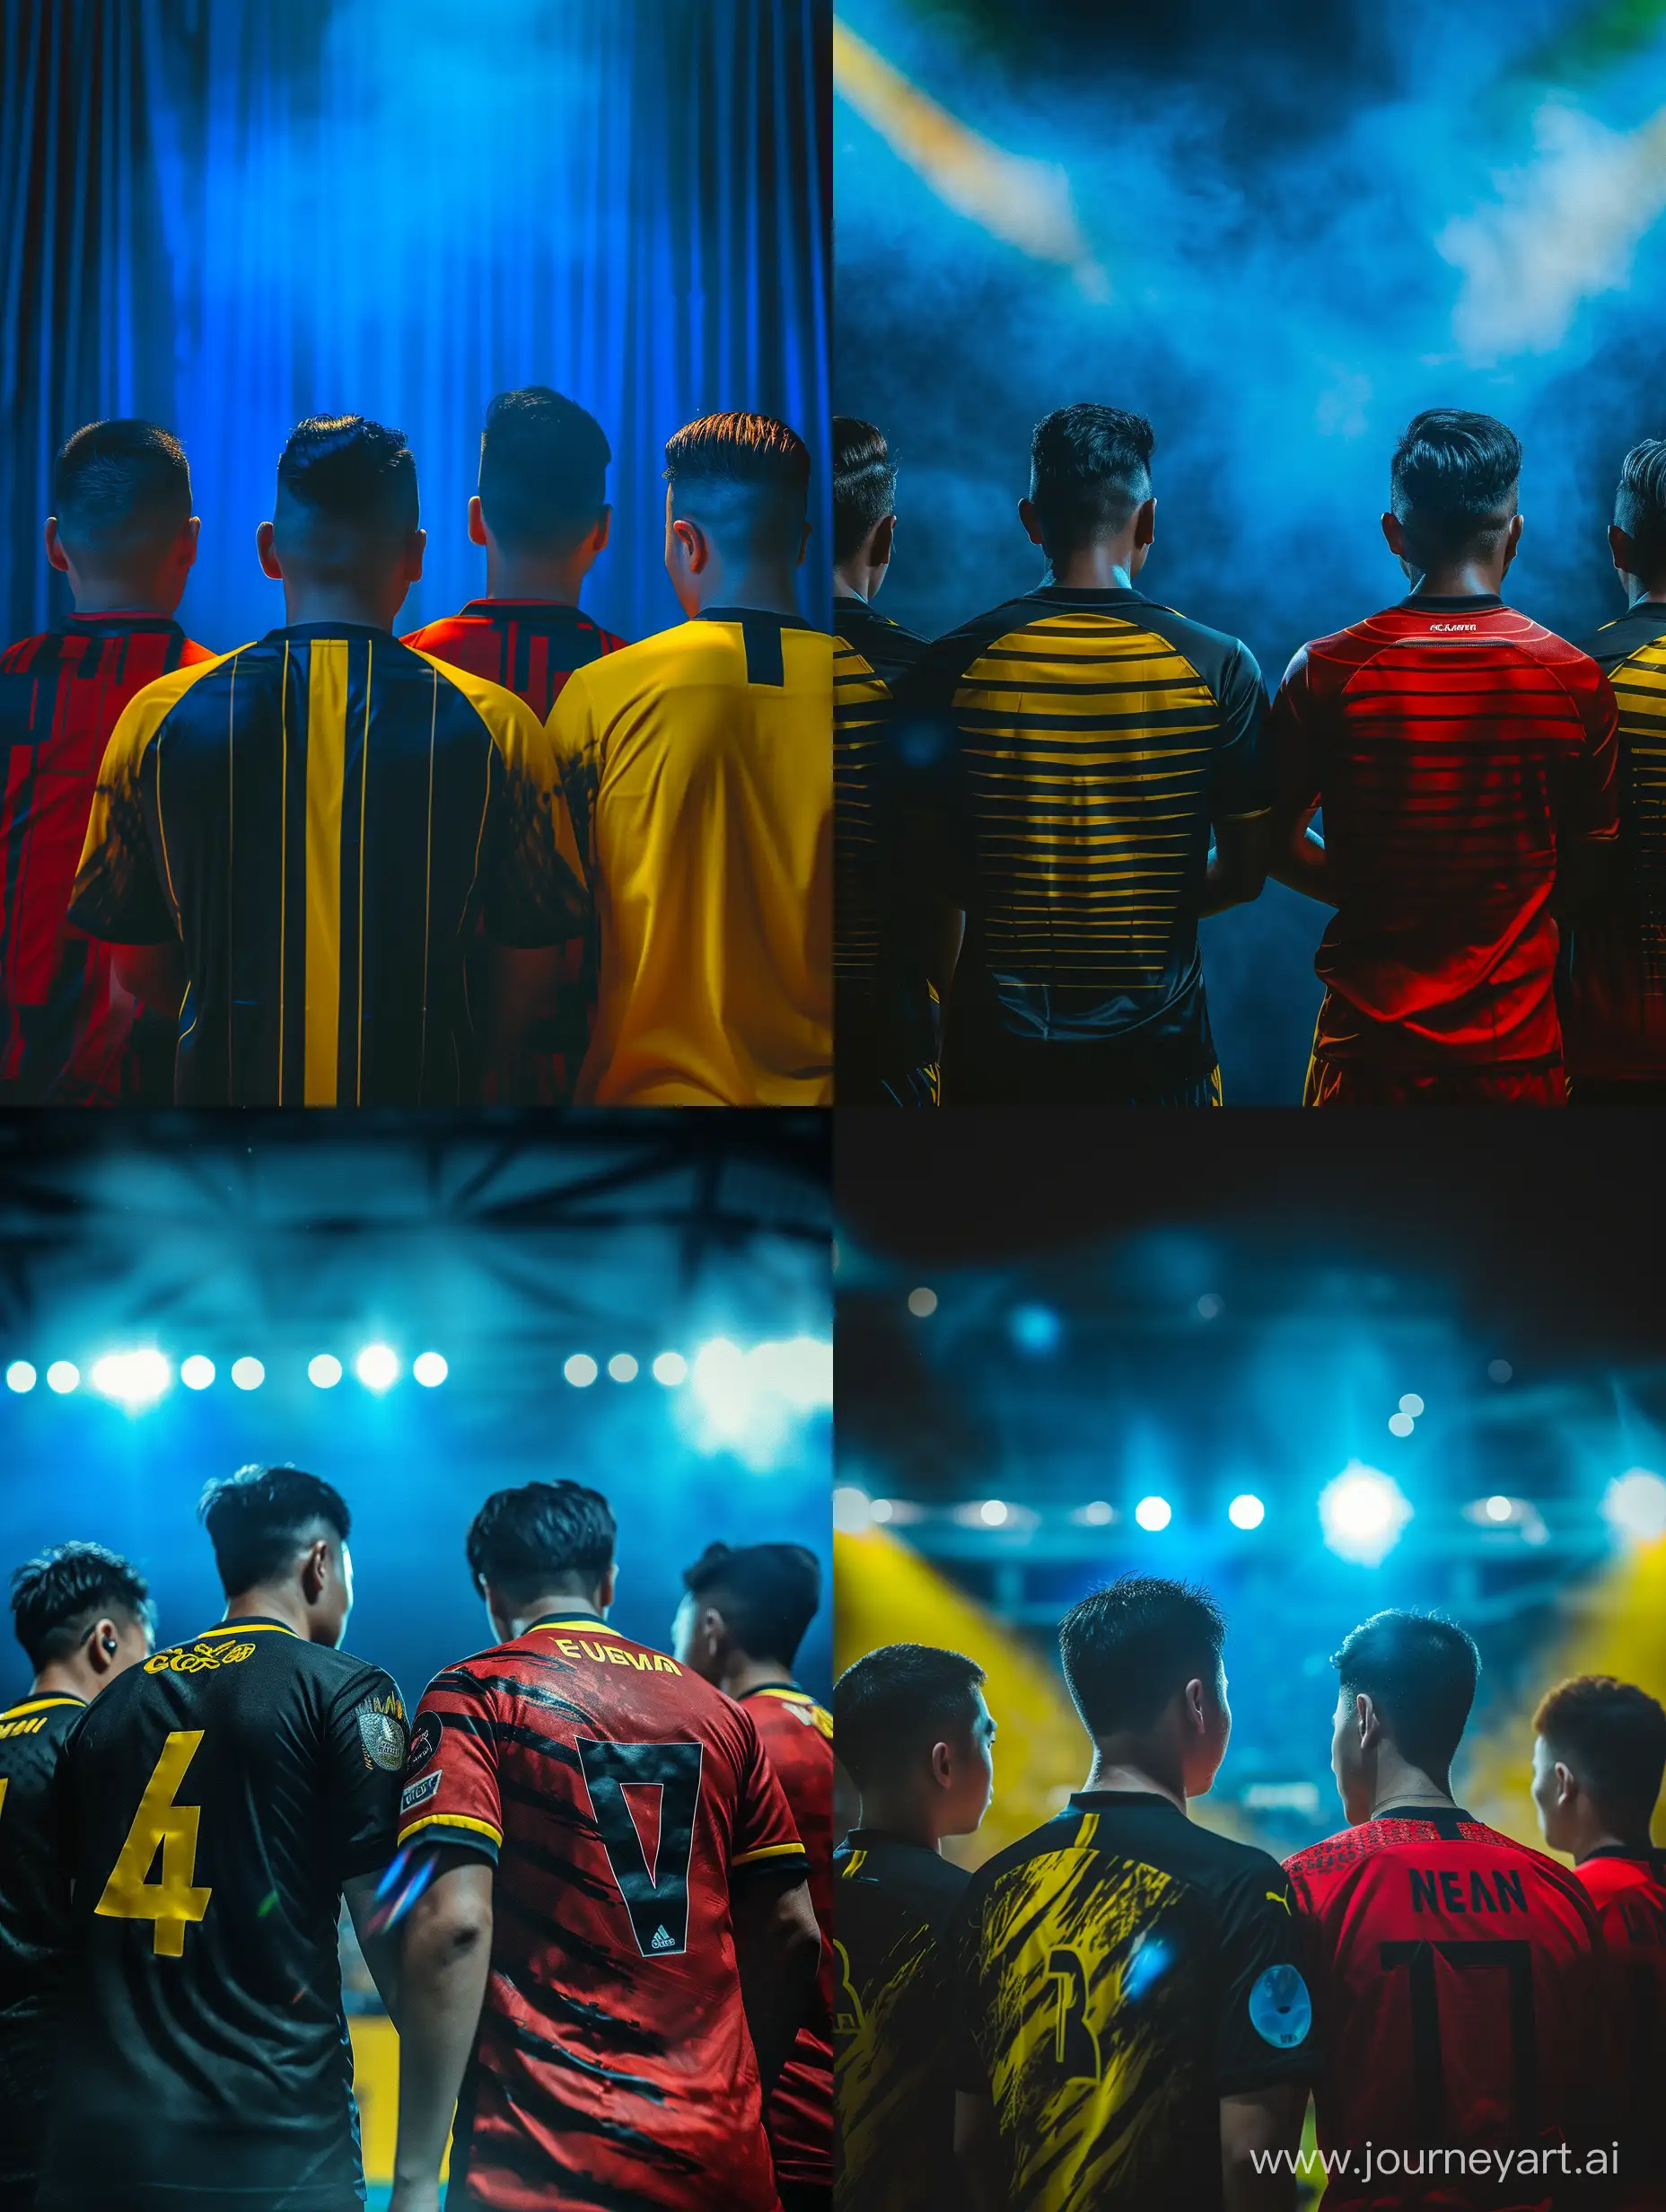 Realistic of a view from the back of four Malaysian national football players. black and yellow jersey. there is blue and yellow lighting. red and yellow jersey. canon eos-id x mark iii dslr --v 6.0